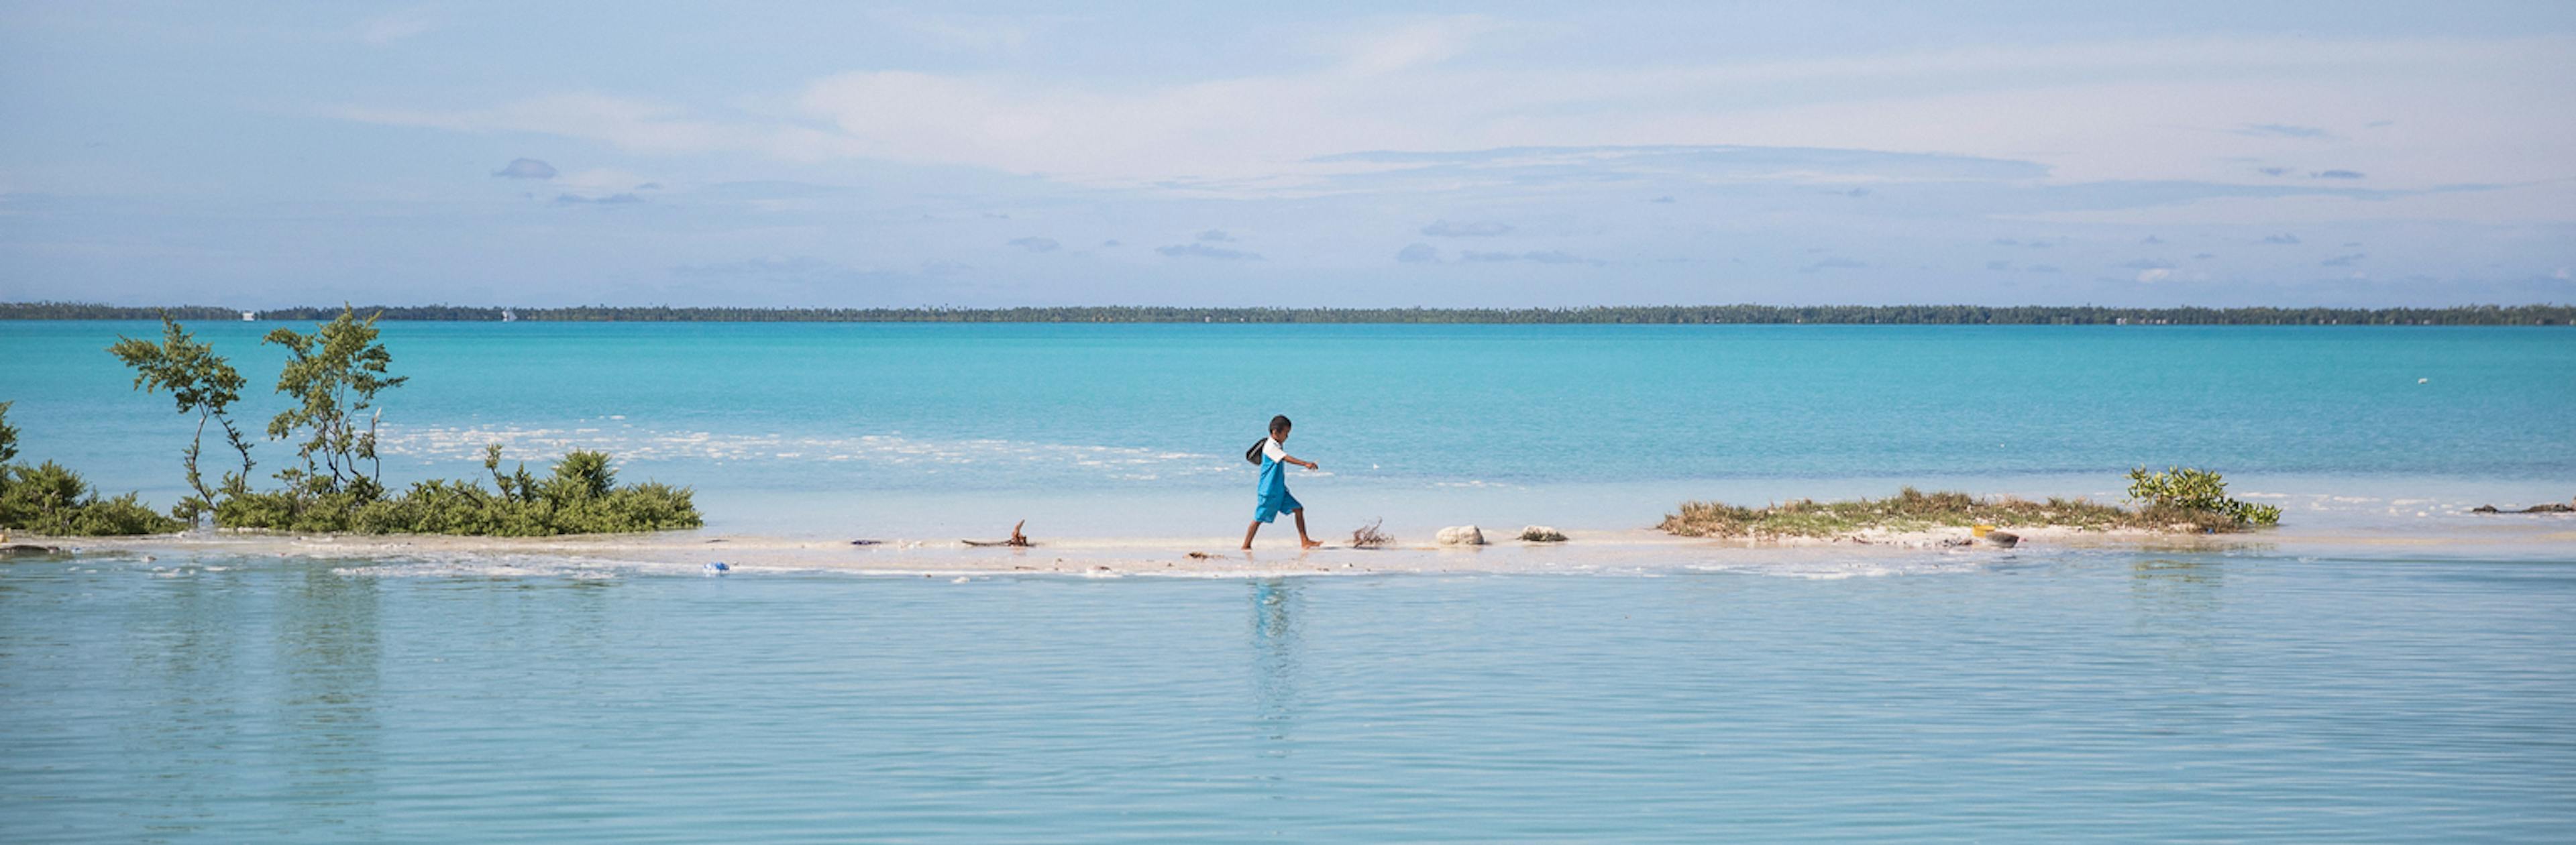 A boy walks from school to his house in Aberao village in South Tarawa, Kiribati. Kiribati is one of the countries most affected by sea level rise. During high tide many villages become inundated making large parts of the villages uninhabitable.